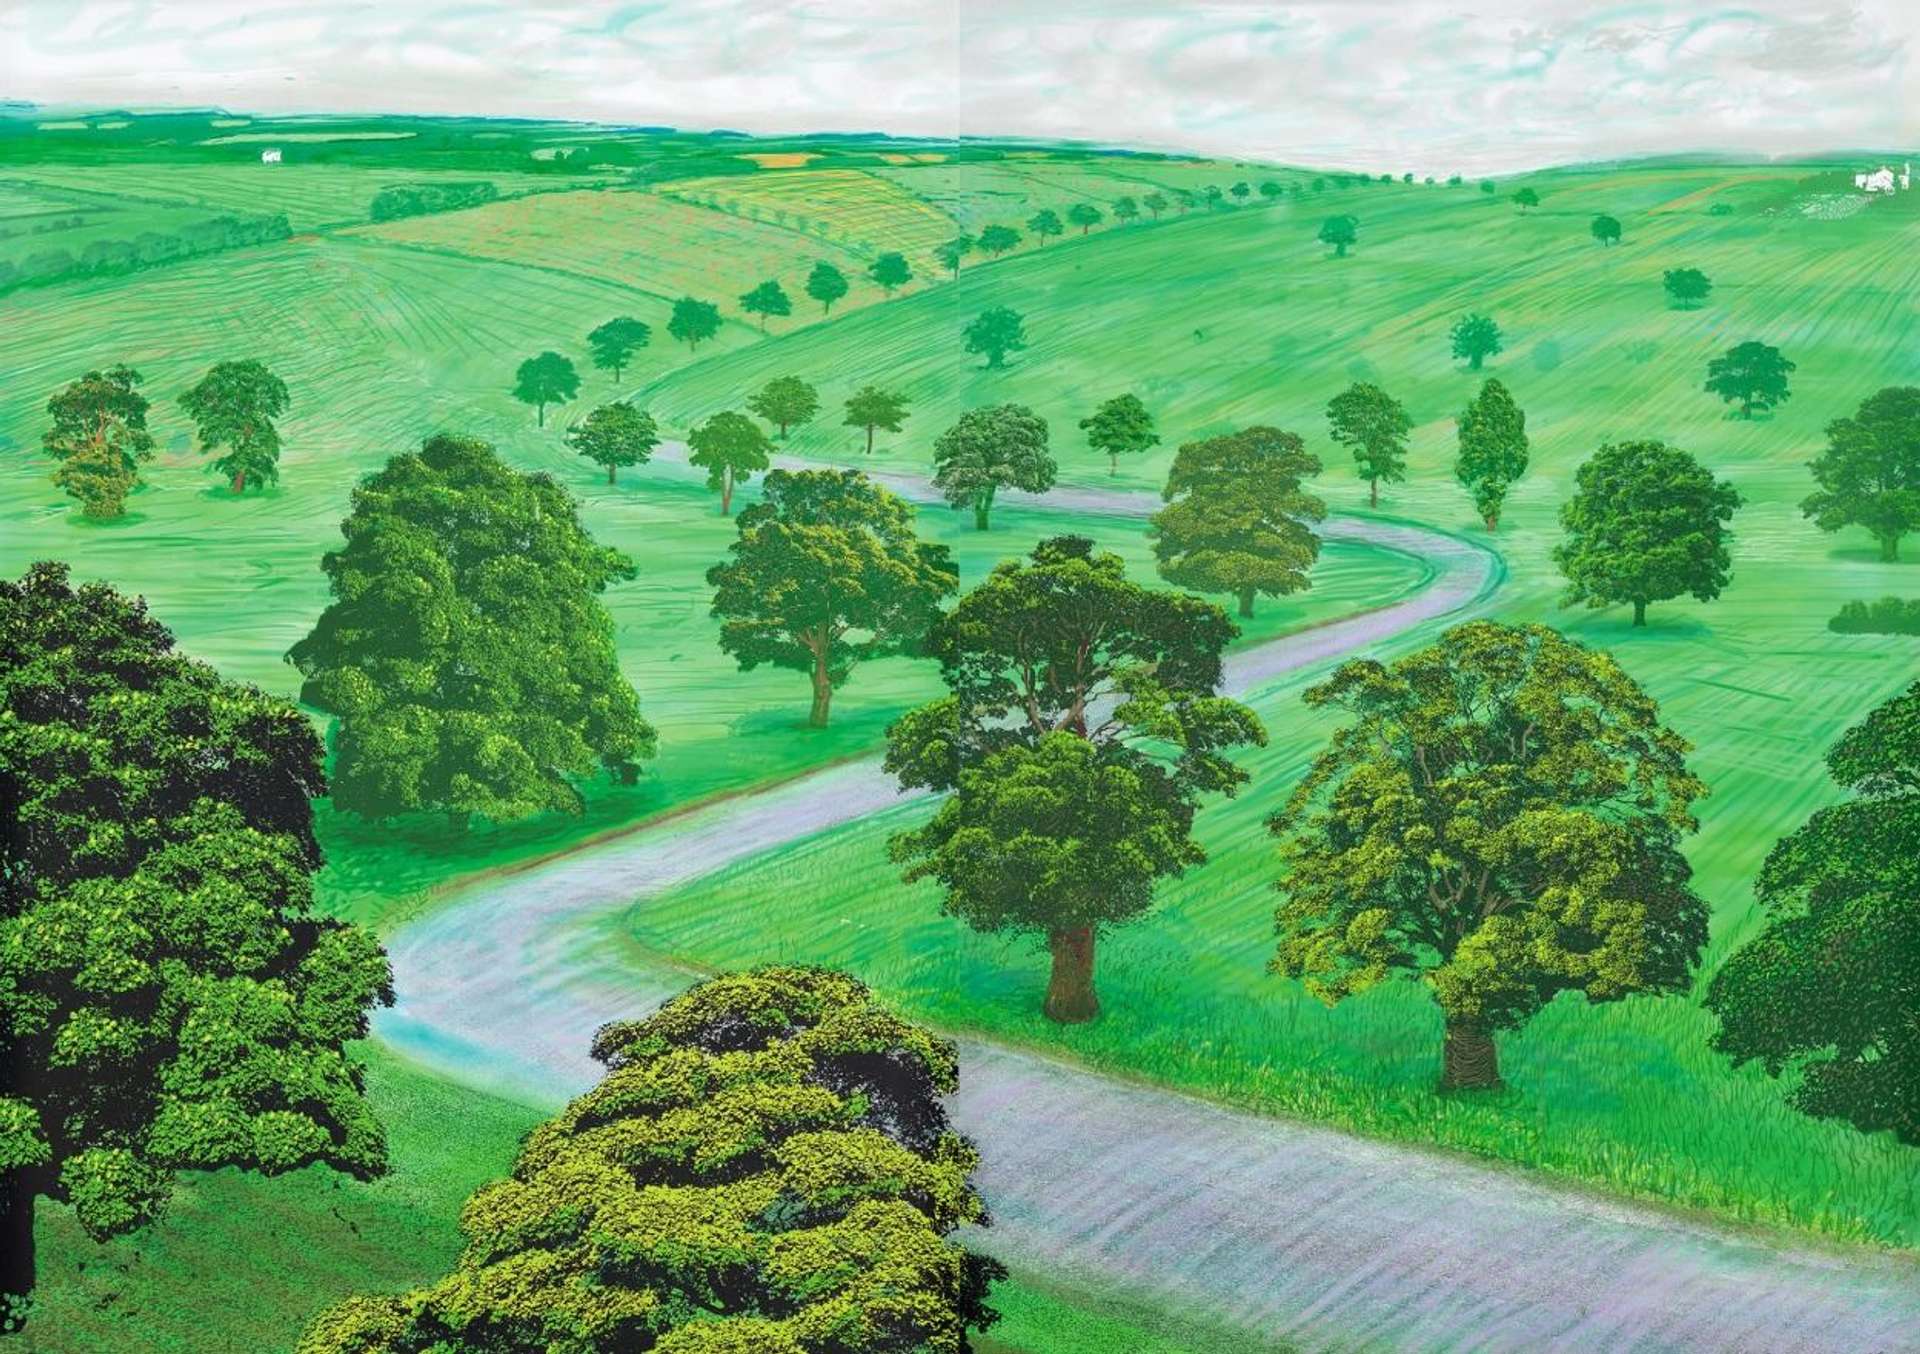 The drawing depicts a serene rural landscape consisting of expansive open fields, a range of abundant, flowering trees and a squiggly, concrete road that sprawls from one side of the picture to the other. Hockney’s depiction of the natural world displays meticulous details and a variety of texture that render the landscape close-to-life while also allowing it to retain a uniquely oneiric undertone. Small elements such as blades of grass along the edges of the road are made visible, bringing the scene closer to the tradition of the naturalist yet dreamy landscapes associated with the works of Monet and Van Gogh.